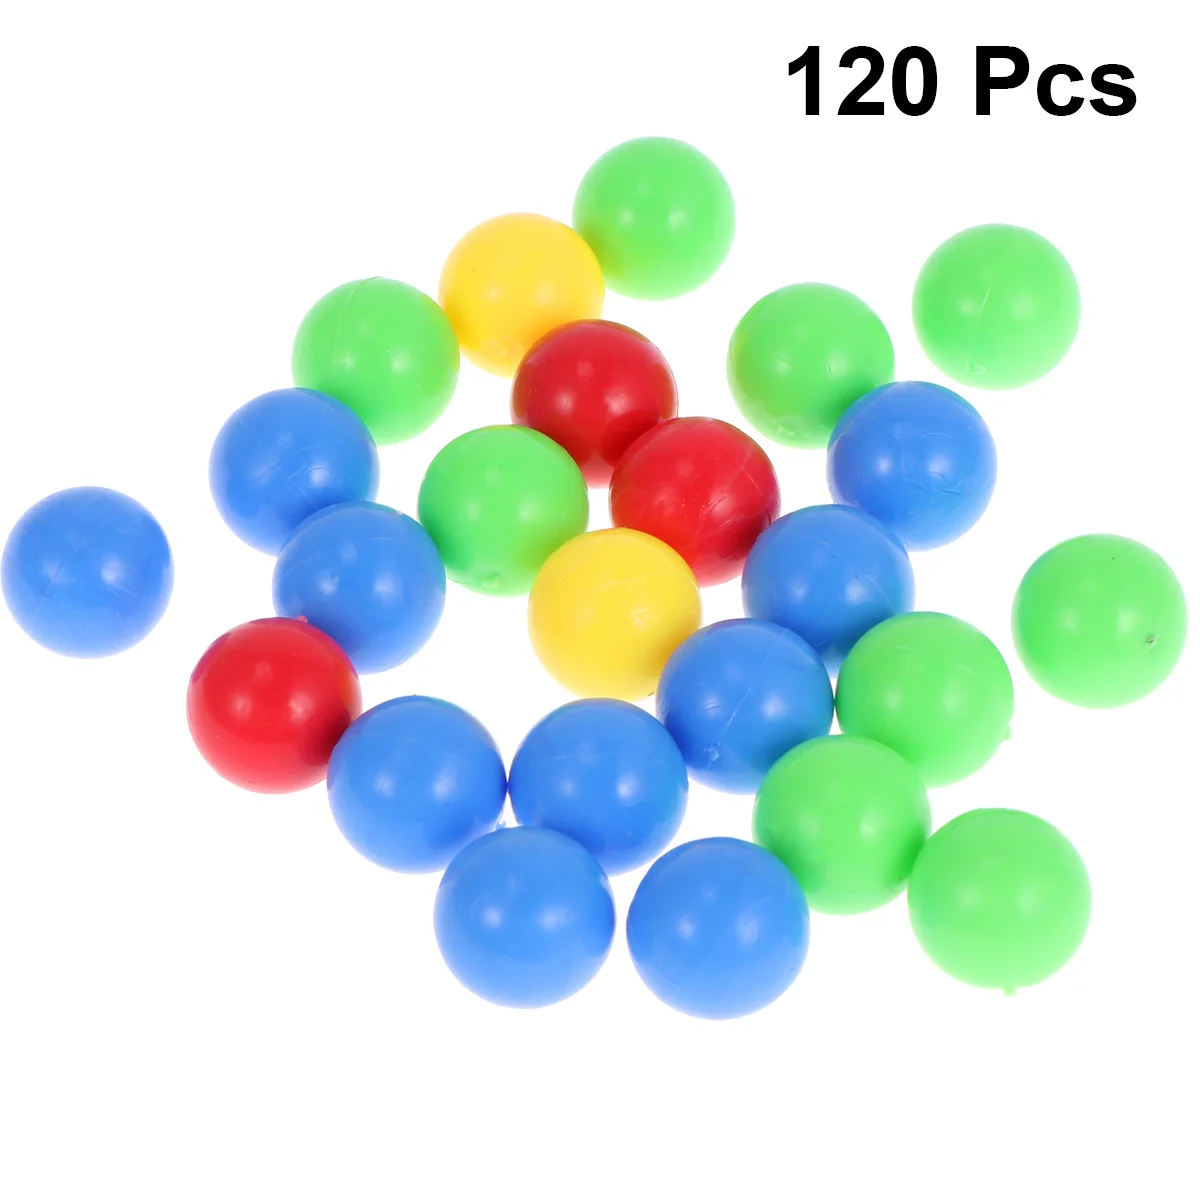 

About 120pcs Game Replacement Marbles Balls Colored Game Balls